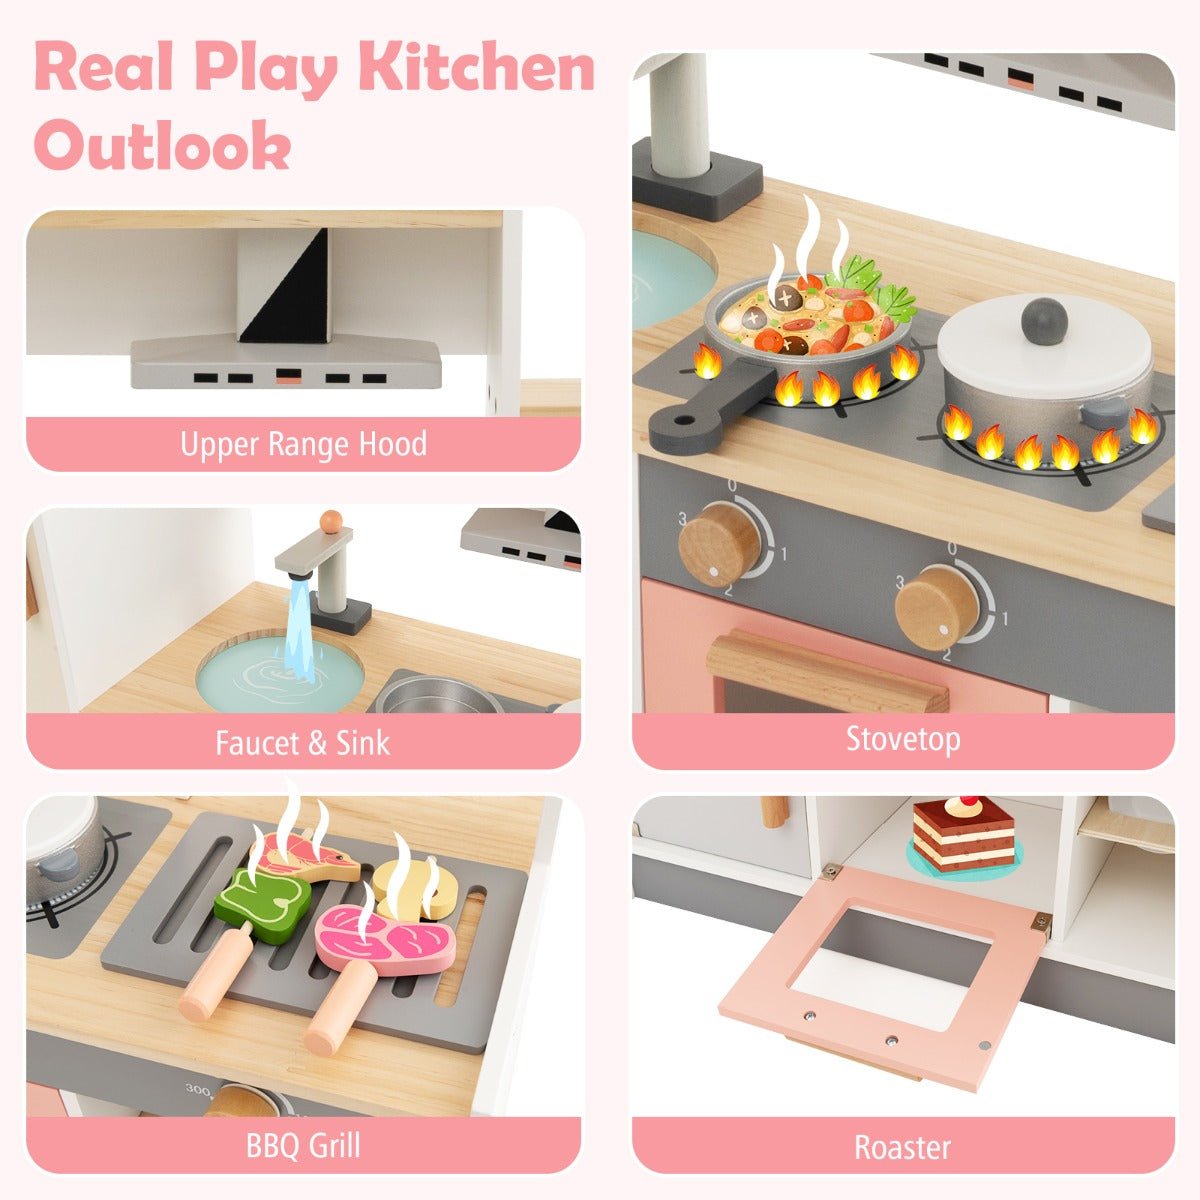 Features Modern Play Kitchen with Range Hood for Kids